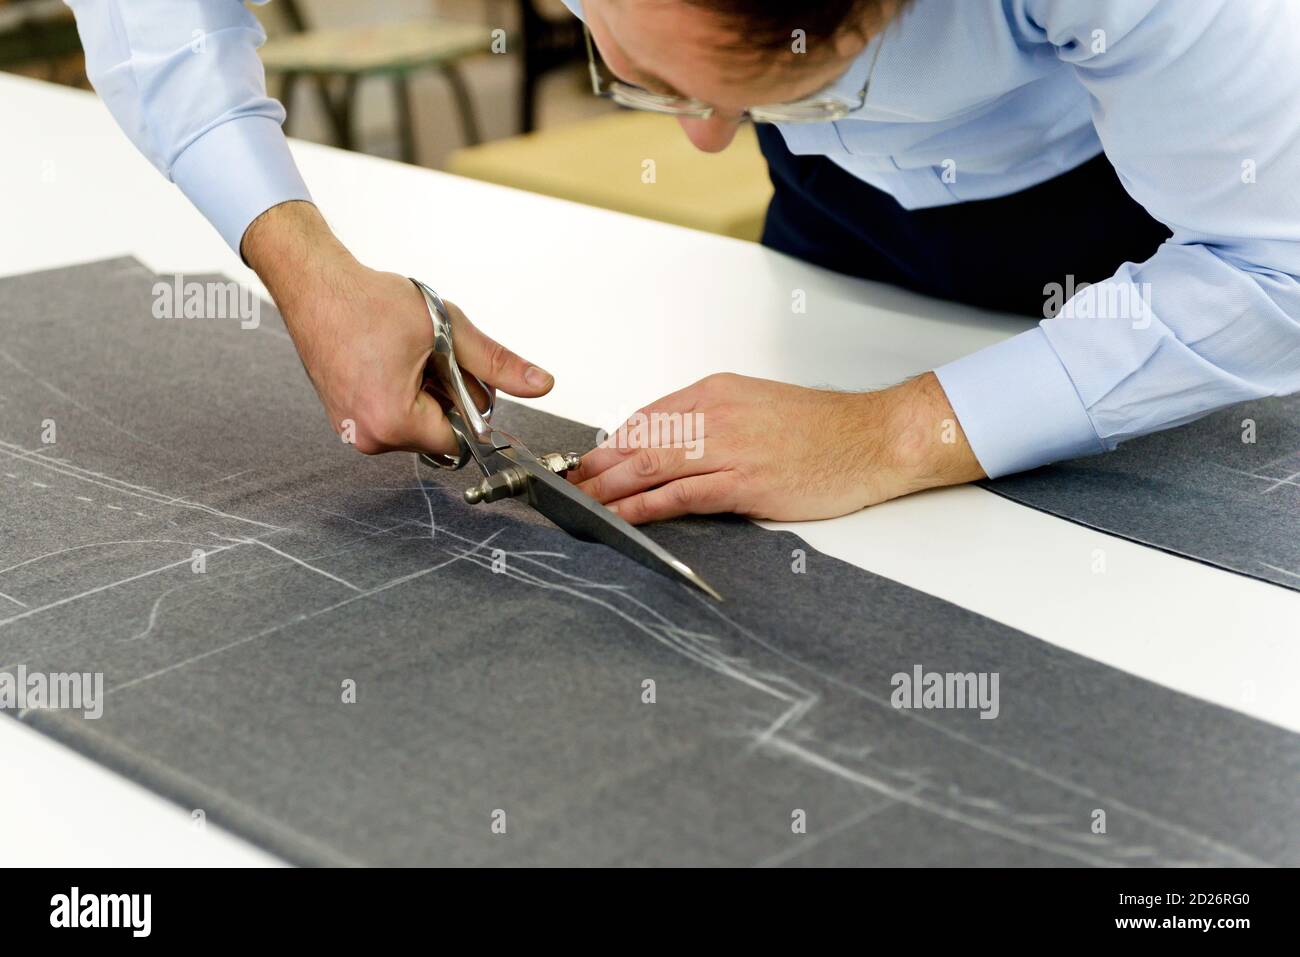 Tailor carefully cutting grey fabric in a workshop using large shears to follow the chalked pattern on the textile as he manufactures bespoke garments Stock Photo